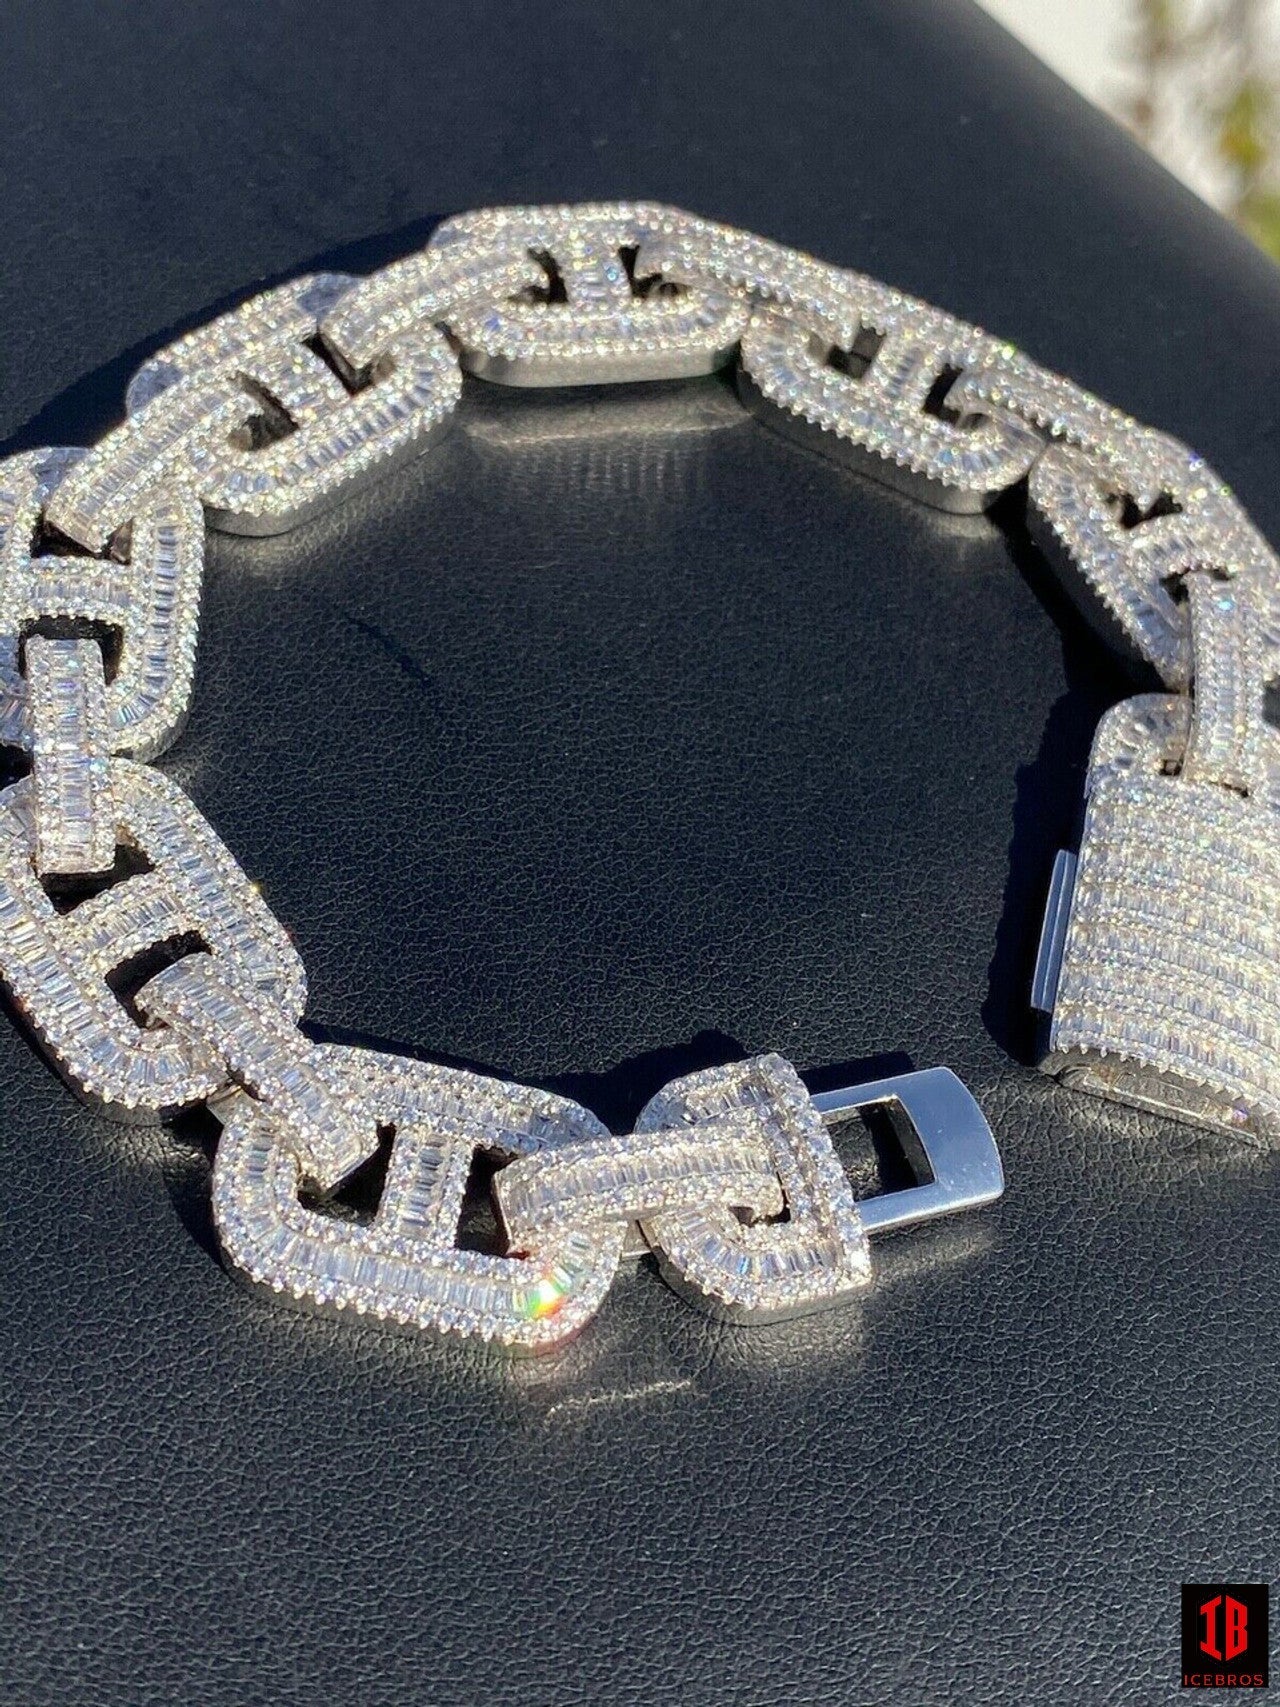 10K Men’s Solid 925 Silver Baguette Gucci Link Bracelet Iced Thick Flooded Out 15mm